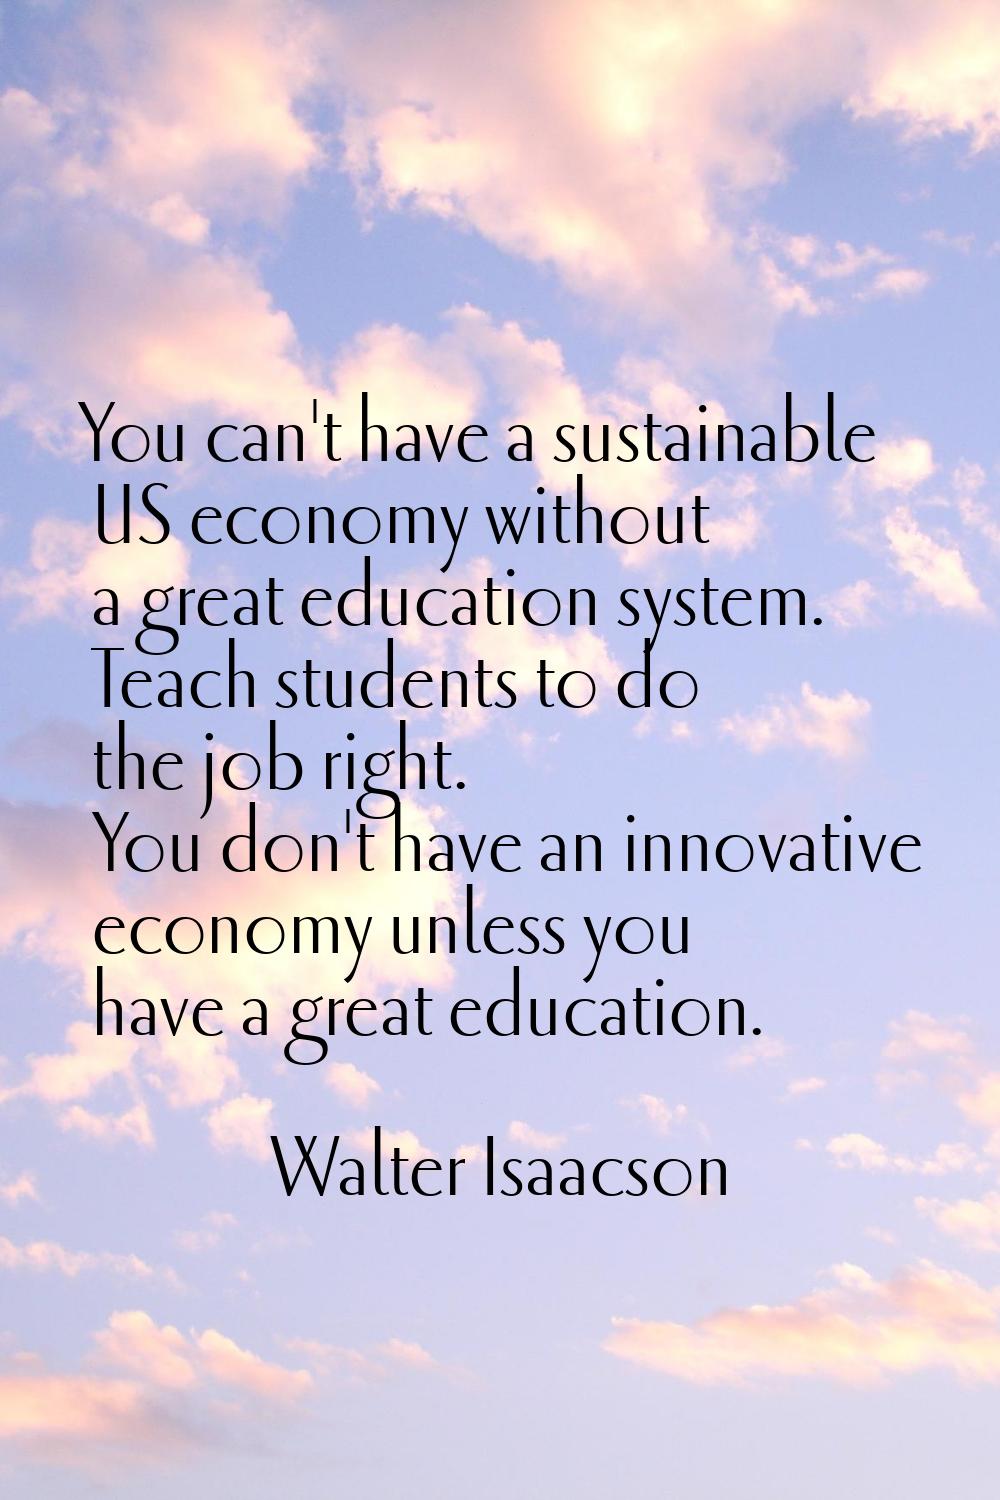 You can't have a sustainable US economy without a great education system. Teach students to do the 